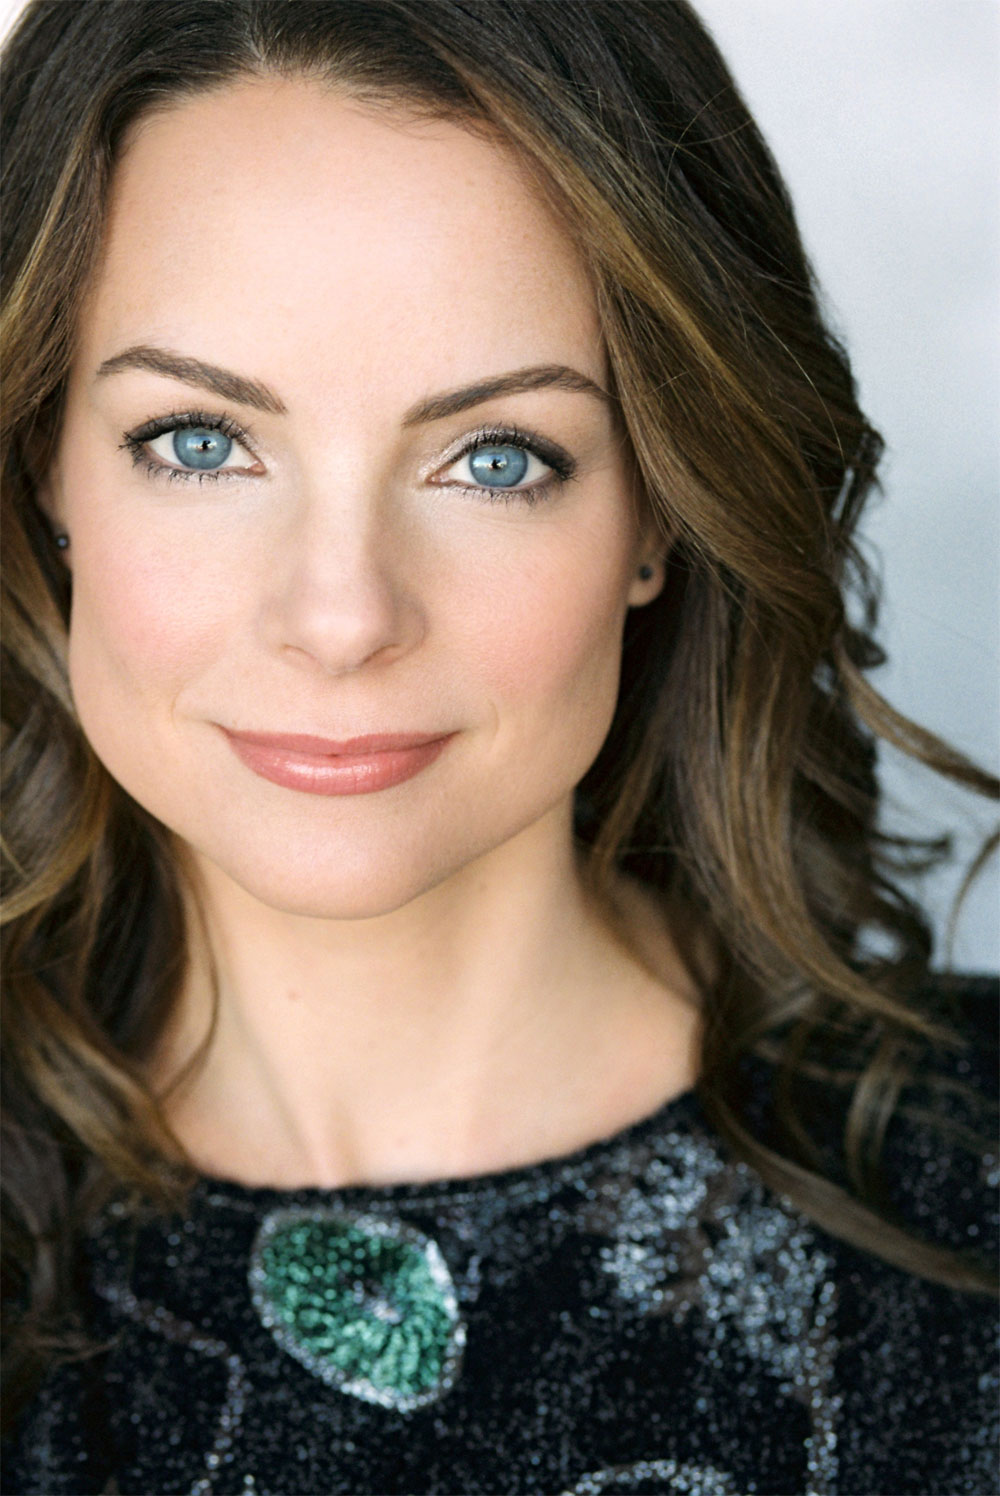 Kimberly williams-paisley two and a half